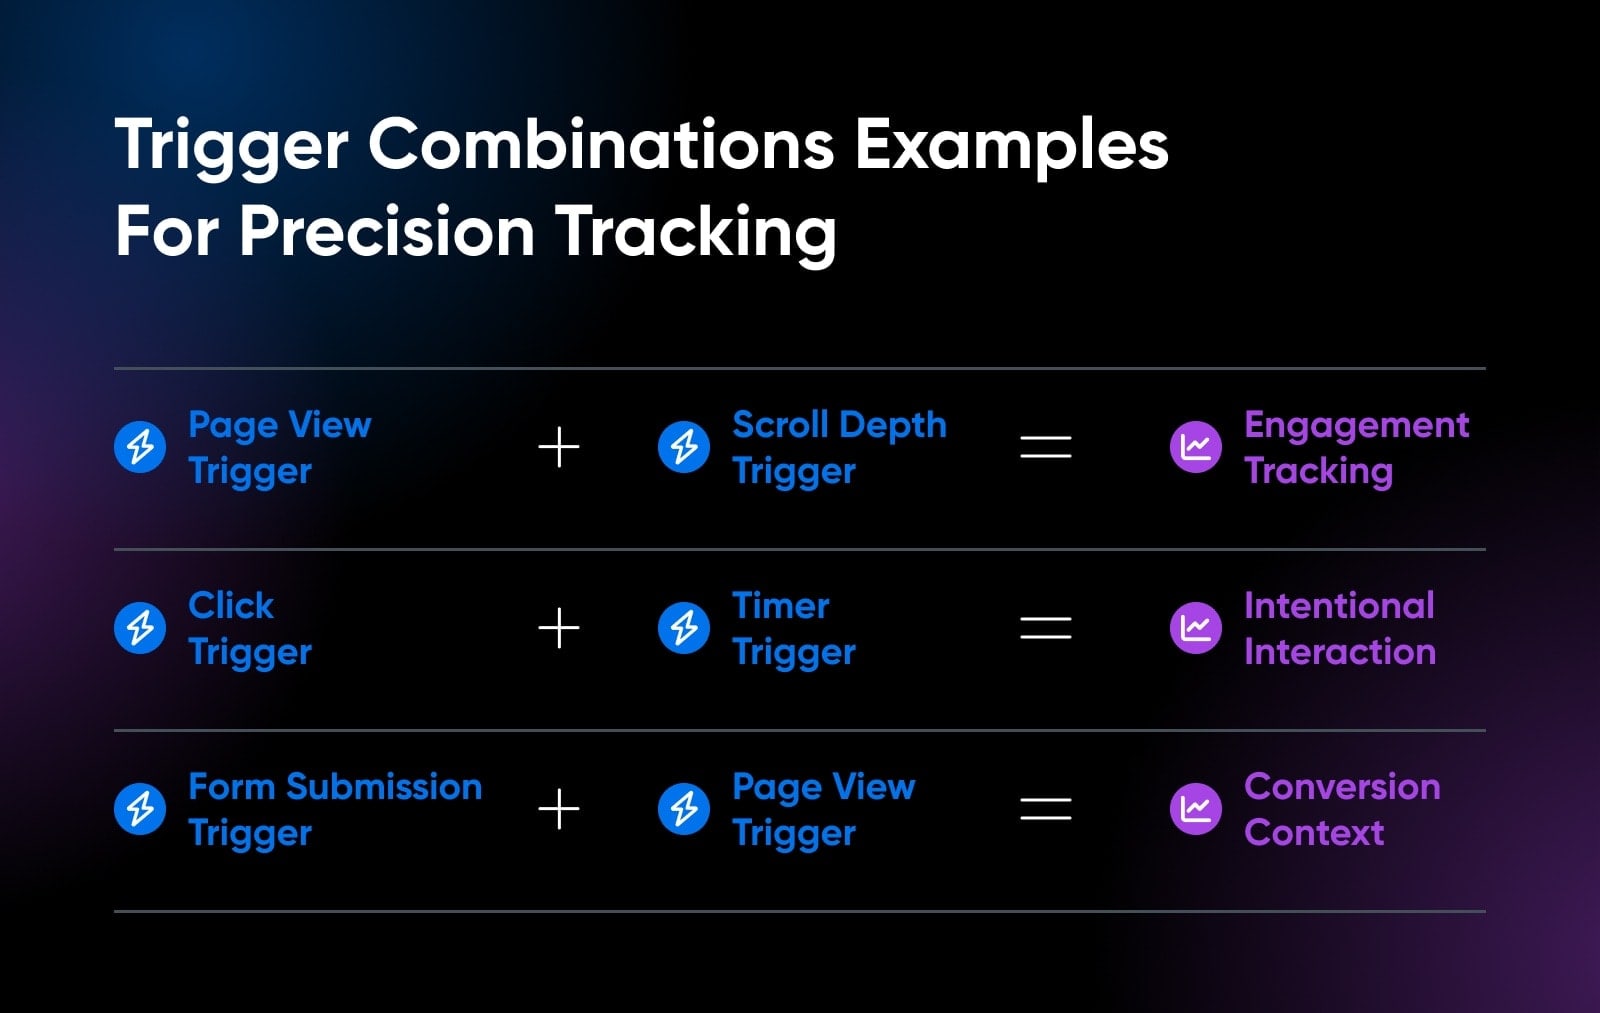 three examples of trigger combinations: page view trigger + scroll deptch trigger can track enagement tracking. click trigger + timer trigger to track international interactions. Form submission trigger + page view trigger to track conversion context